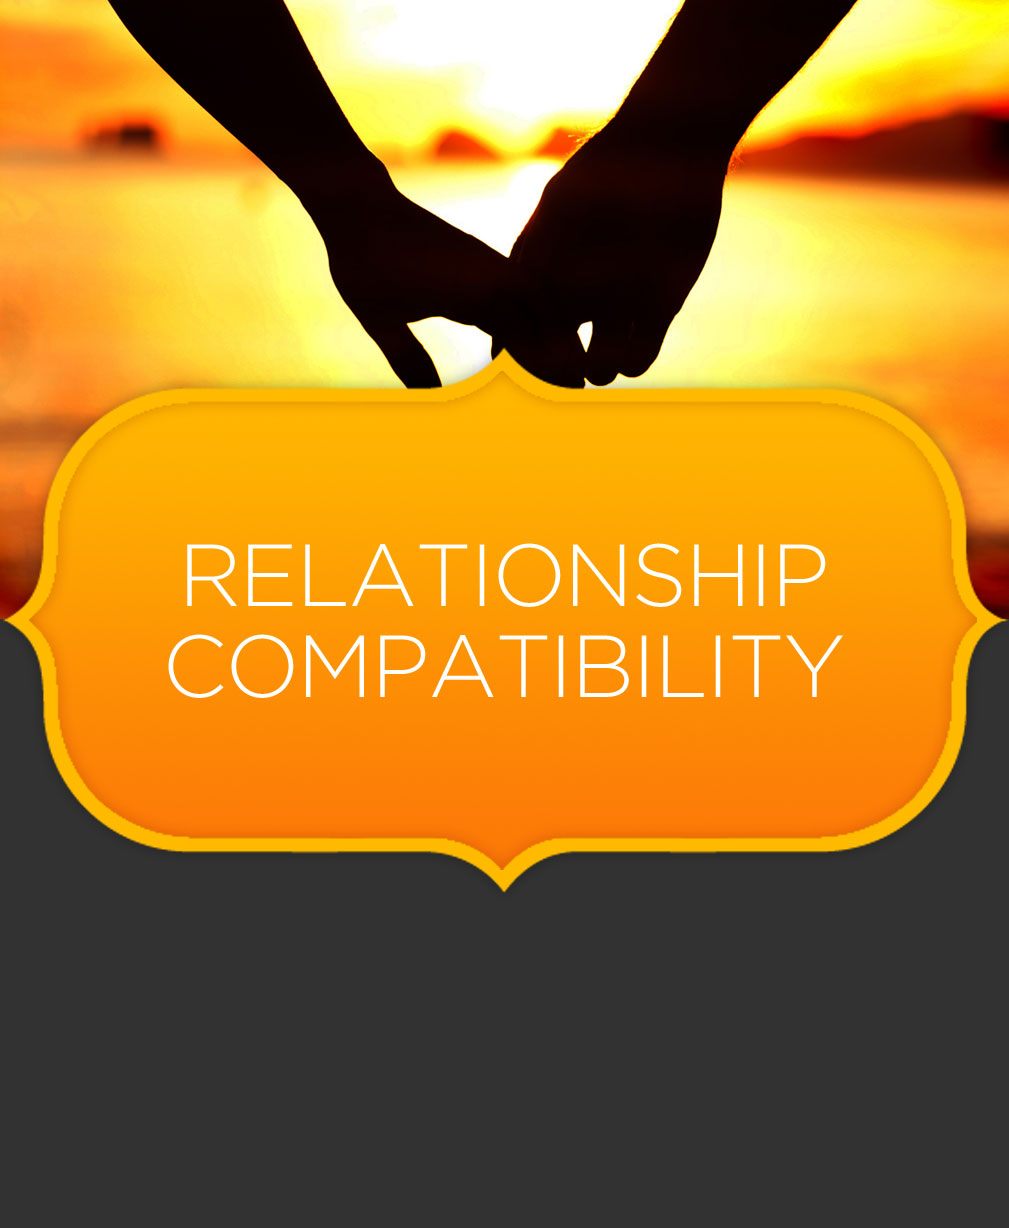 Relationship Compatibility